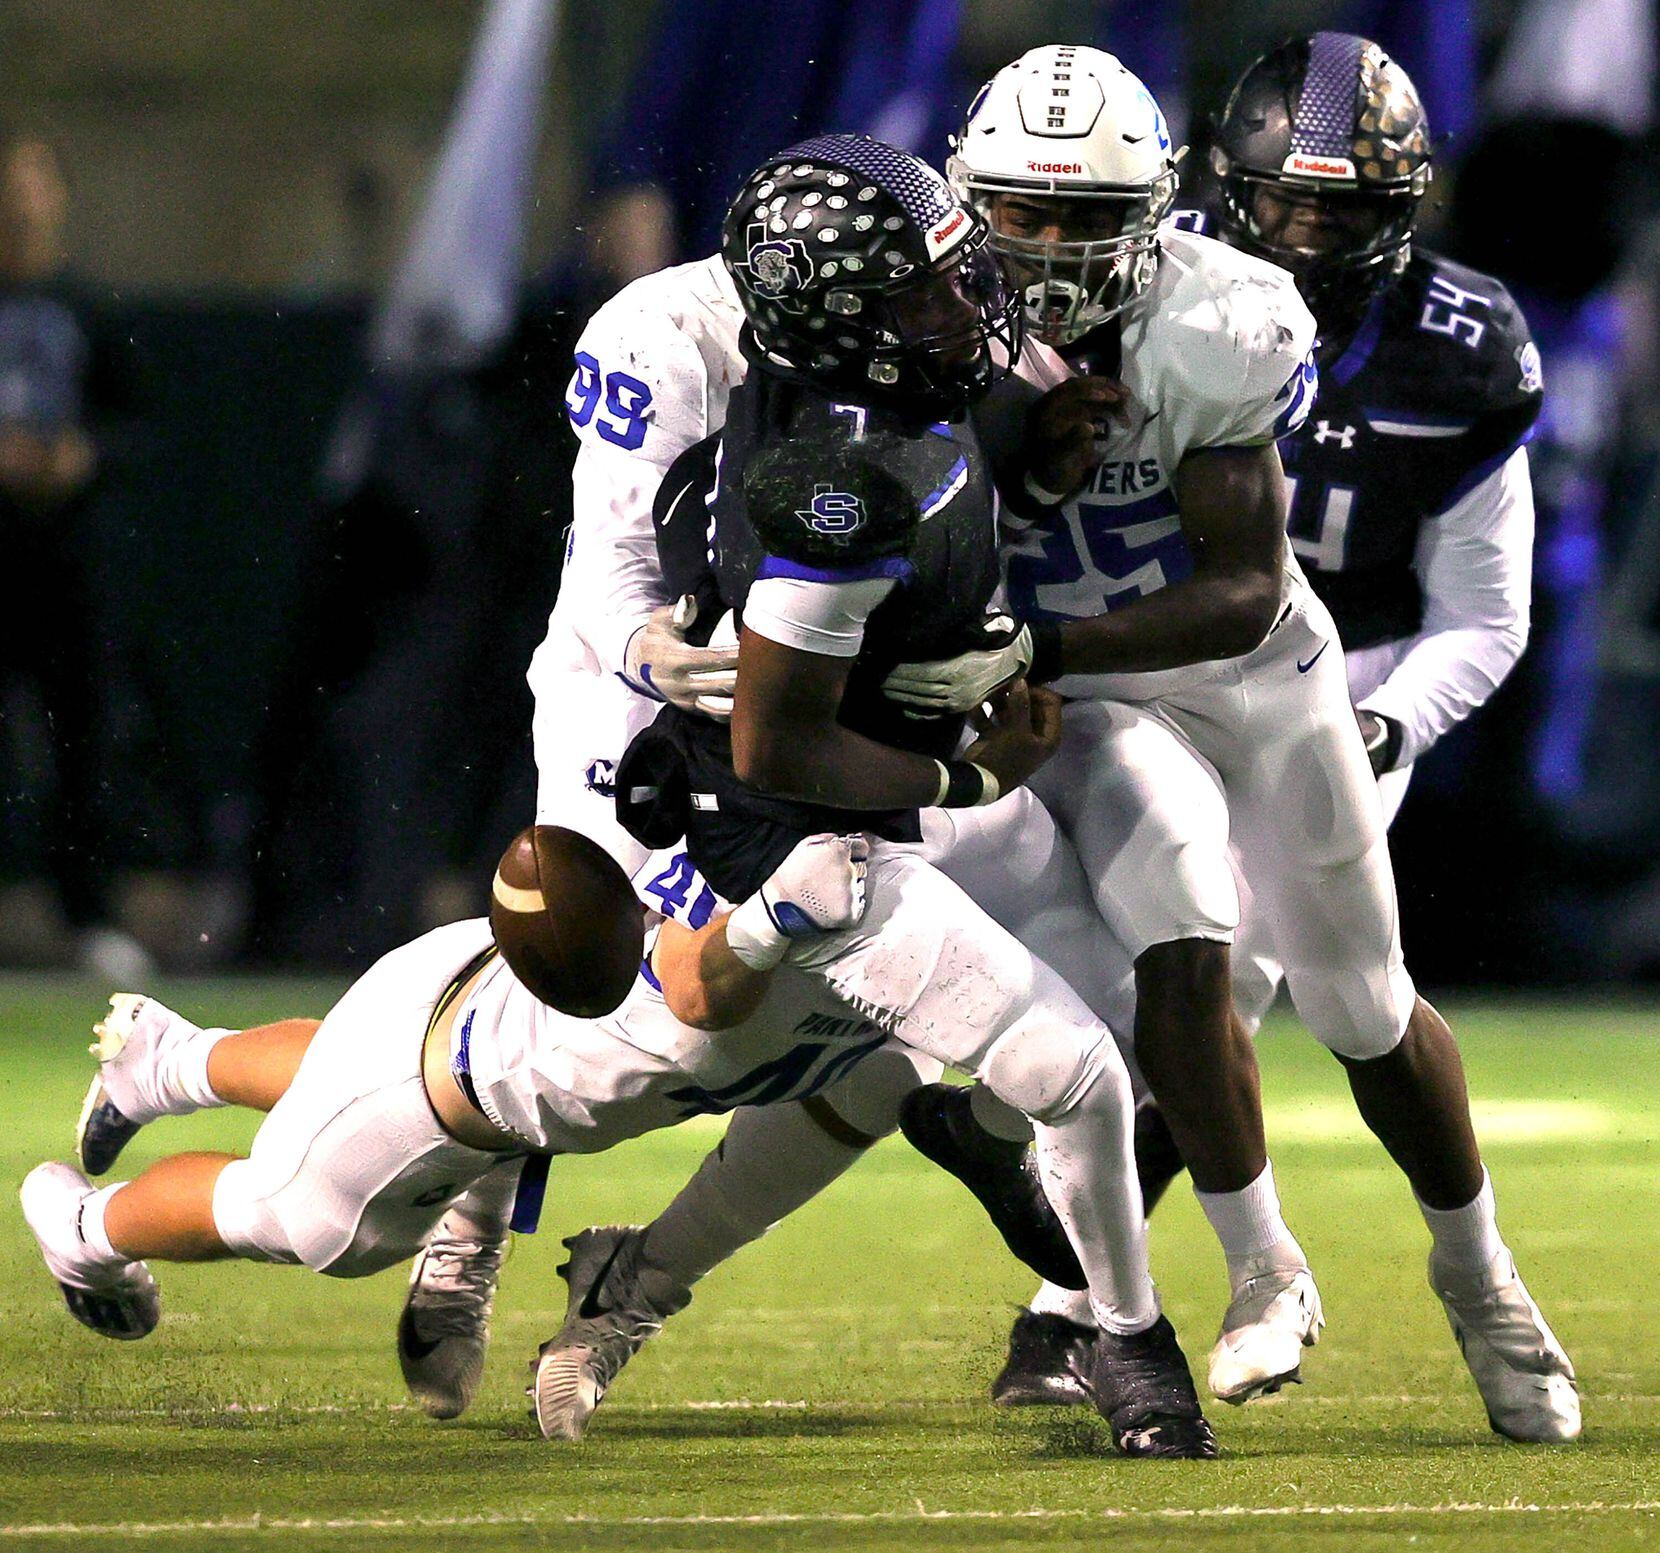 Mansfield Summit quarterback David Hopkins (7) fumbles the ball against Midlothian during the first half of the 5A Division I Region I semifinal high school football playoff game played on November 26, 2021 at Gopher-Warrior Bowl in Grand Prairie.  (Steve Nurenberg/Special Contributor)